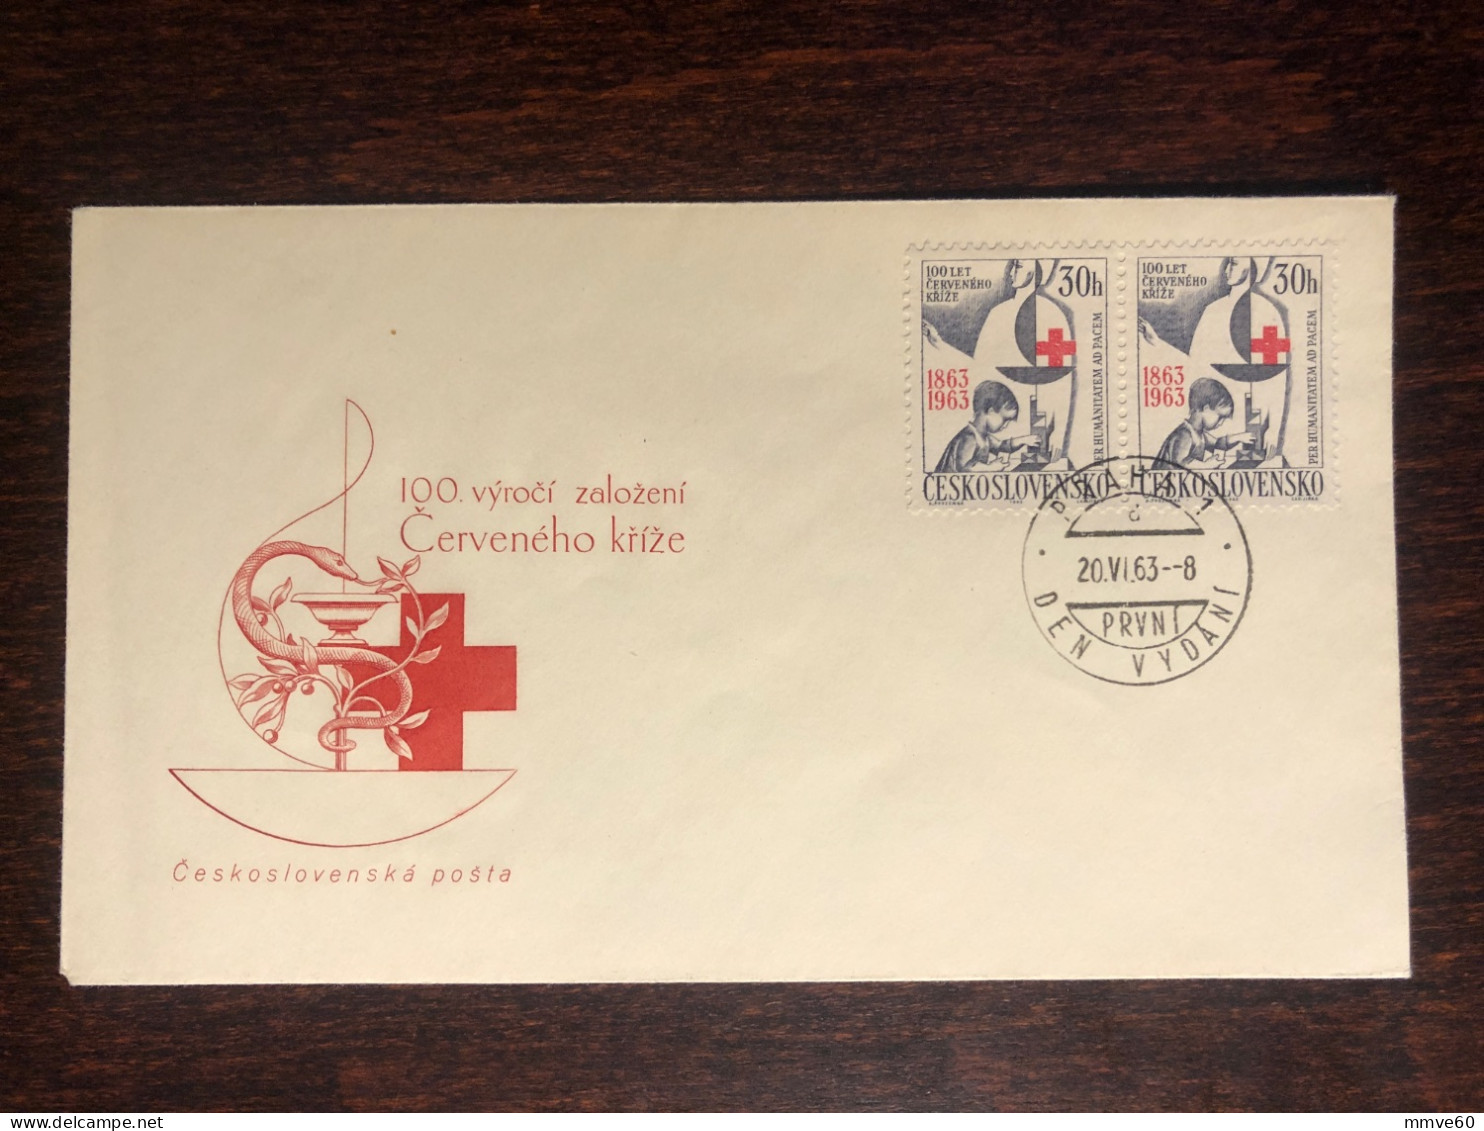 CZECHOSLOVAKIA FDC COVER 1963 YEAR RED CROSS HEALTH MEDICINE STAMPS - FDC